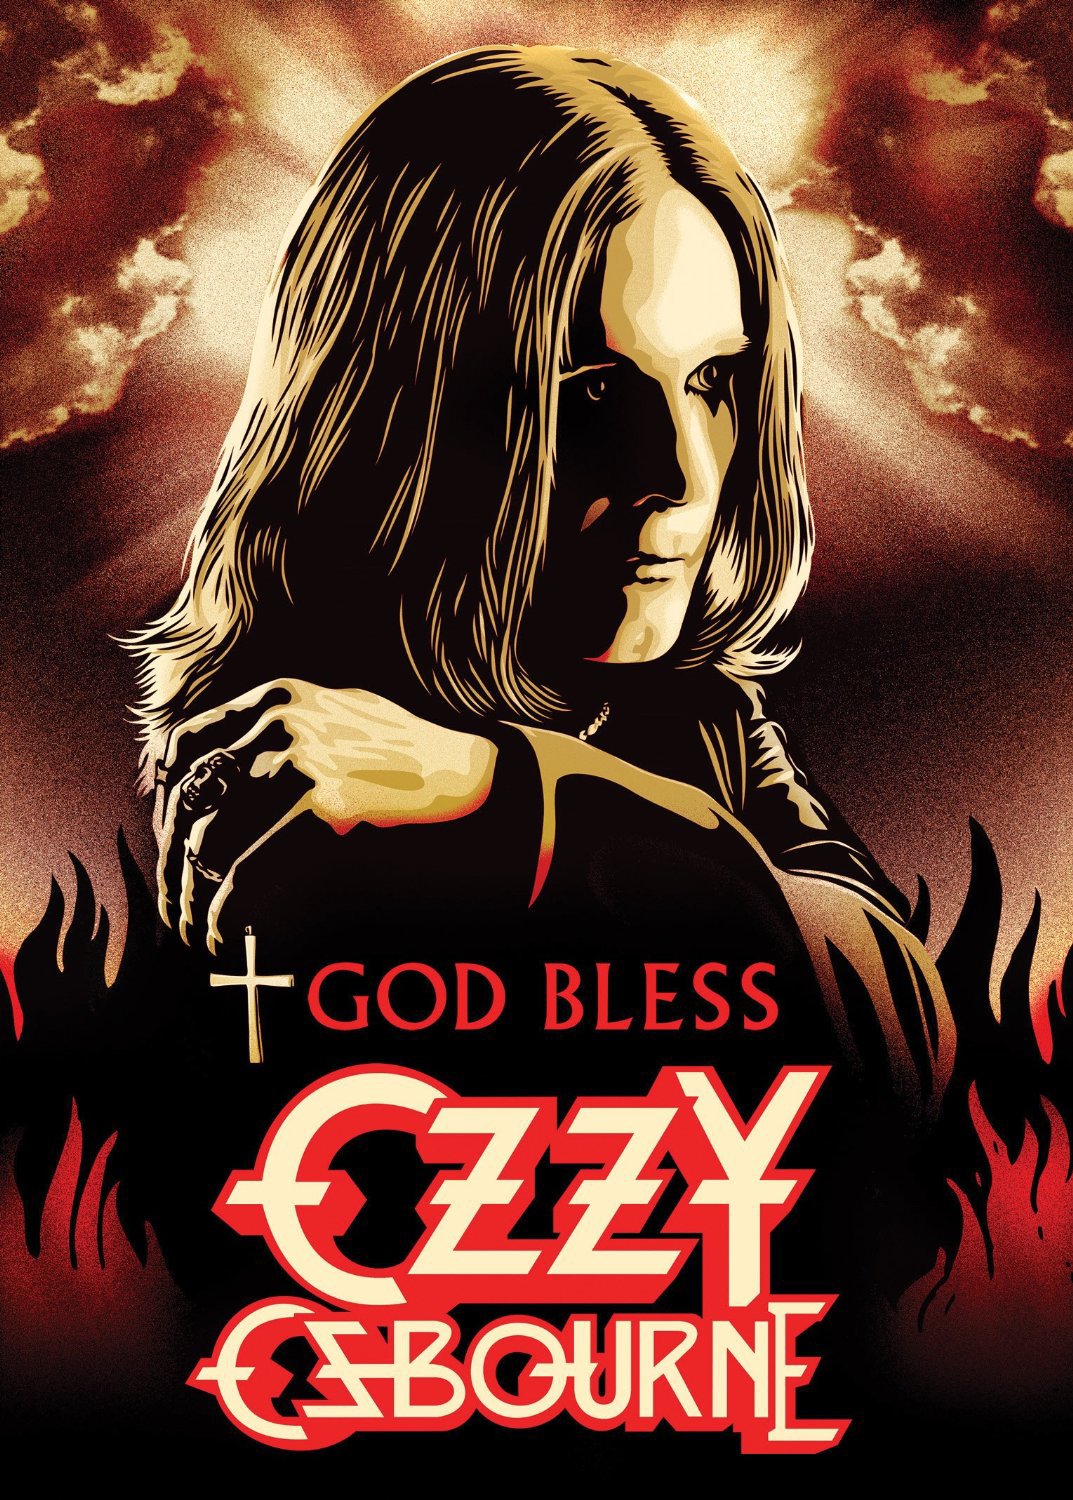 God Bless Ozzy Osbourne – A Look Back At This 2011 Overview of the Ozzman’s Life and Career!